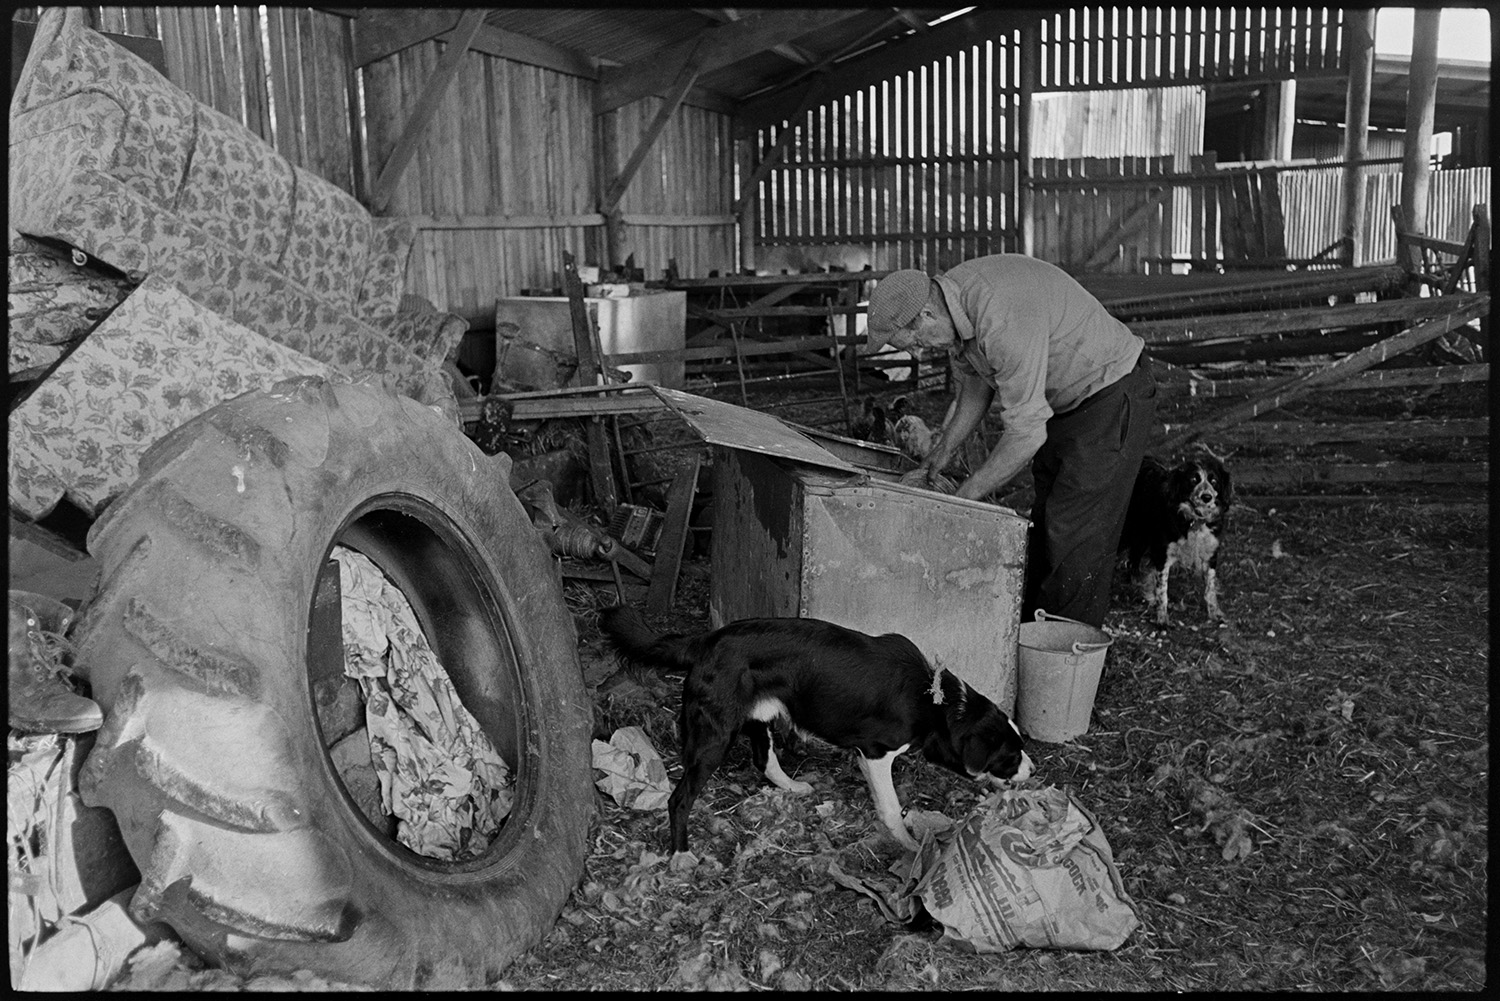 Farmer feeding dogs in barn. 
[George Ayre feeding two dogs in a barn at Ashwell, Dolton. Also in the barn is an old tractor tyre, a sofa and various gate or fencing parts.]